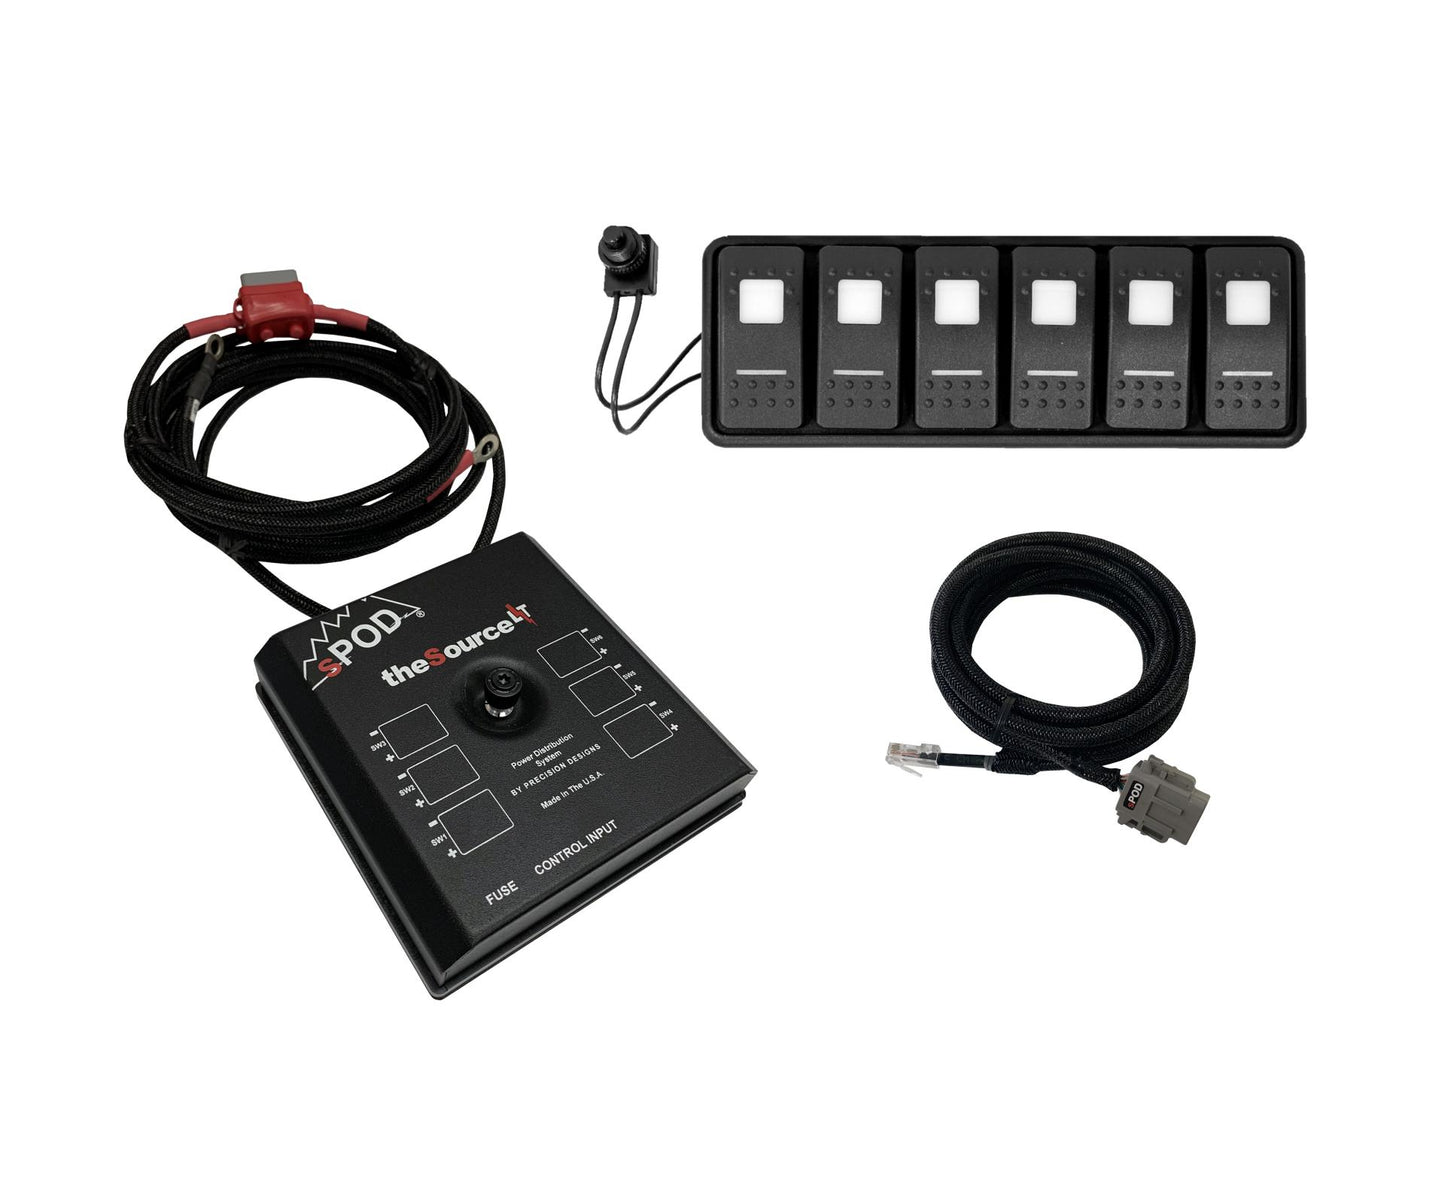 SourceLT Modular w/ Red LED for Uni with 84 Inch battery cables